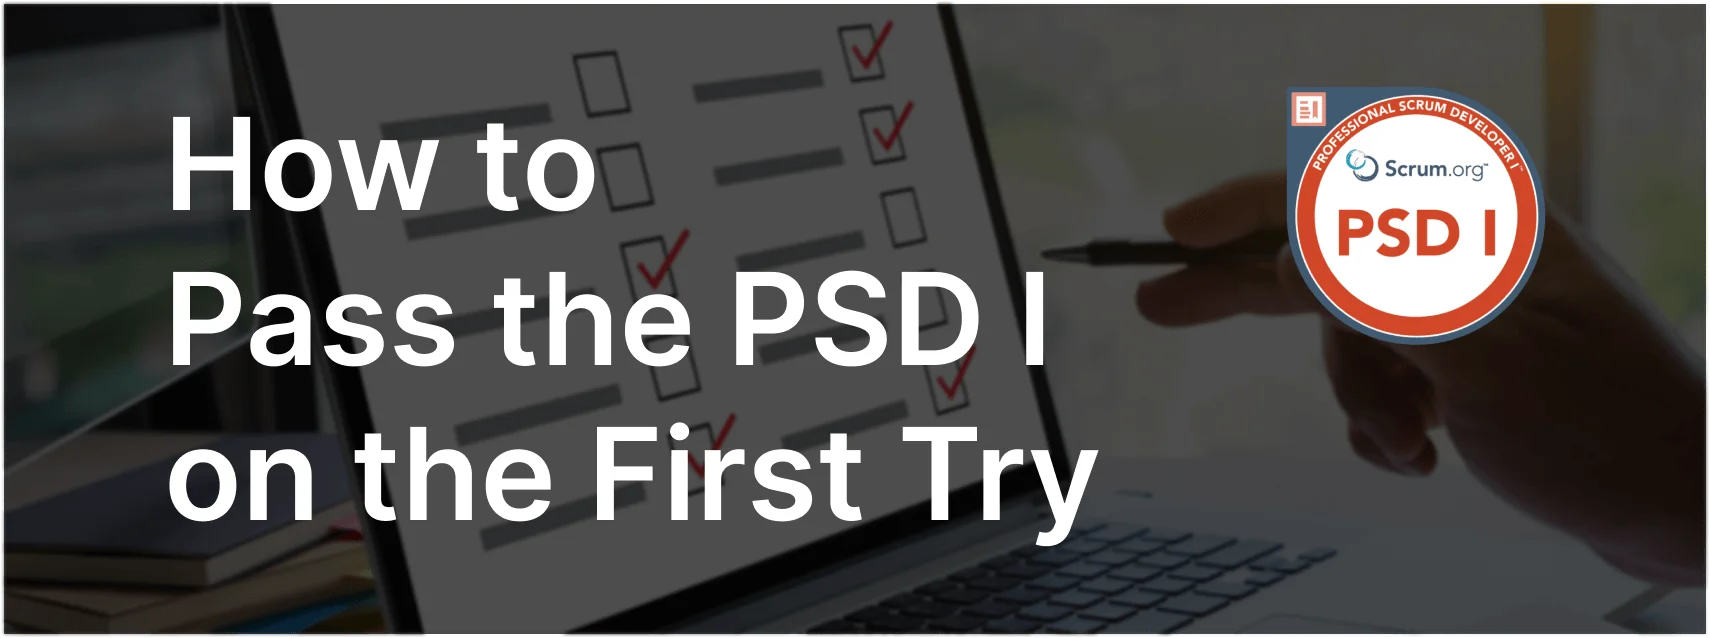 How To Pass PSD Exam on the First Try